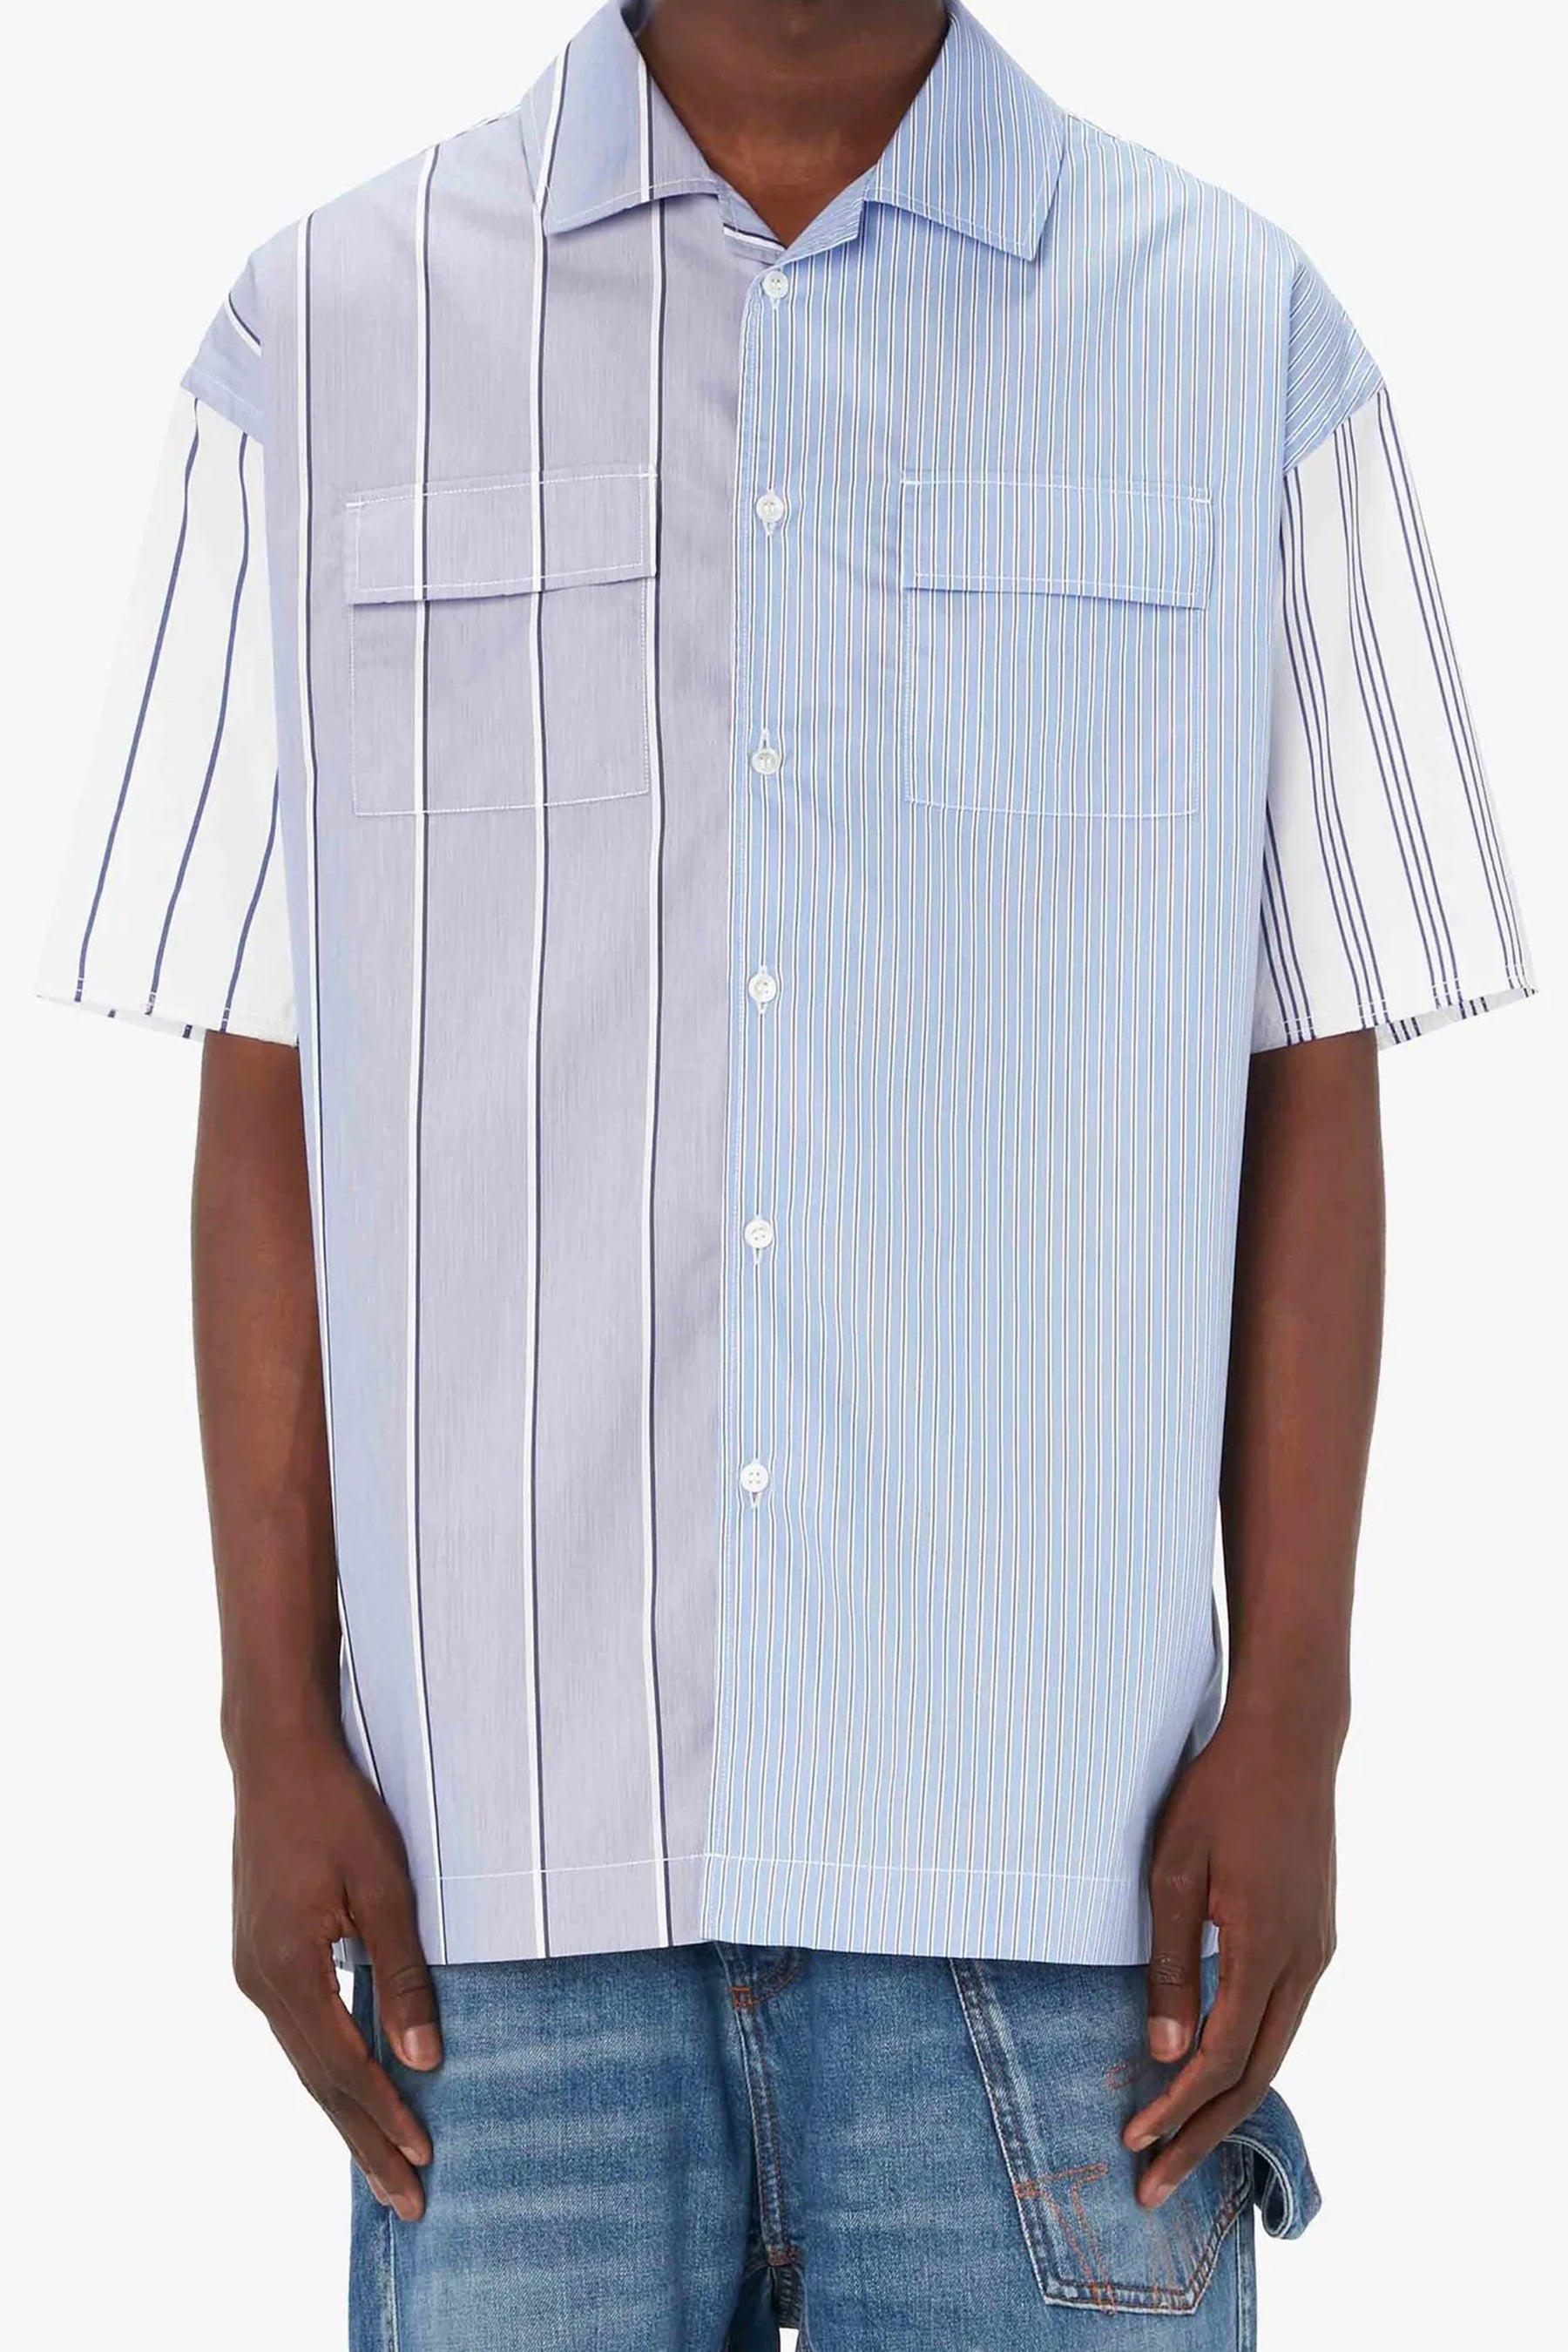 JW Anderson RELAXED FIT SHORT SLEEVE SHIRT / BLU MULTI